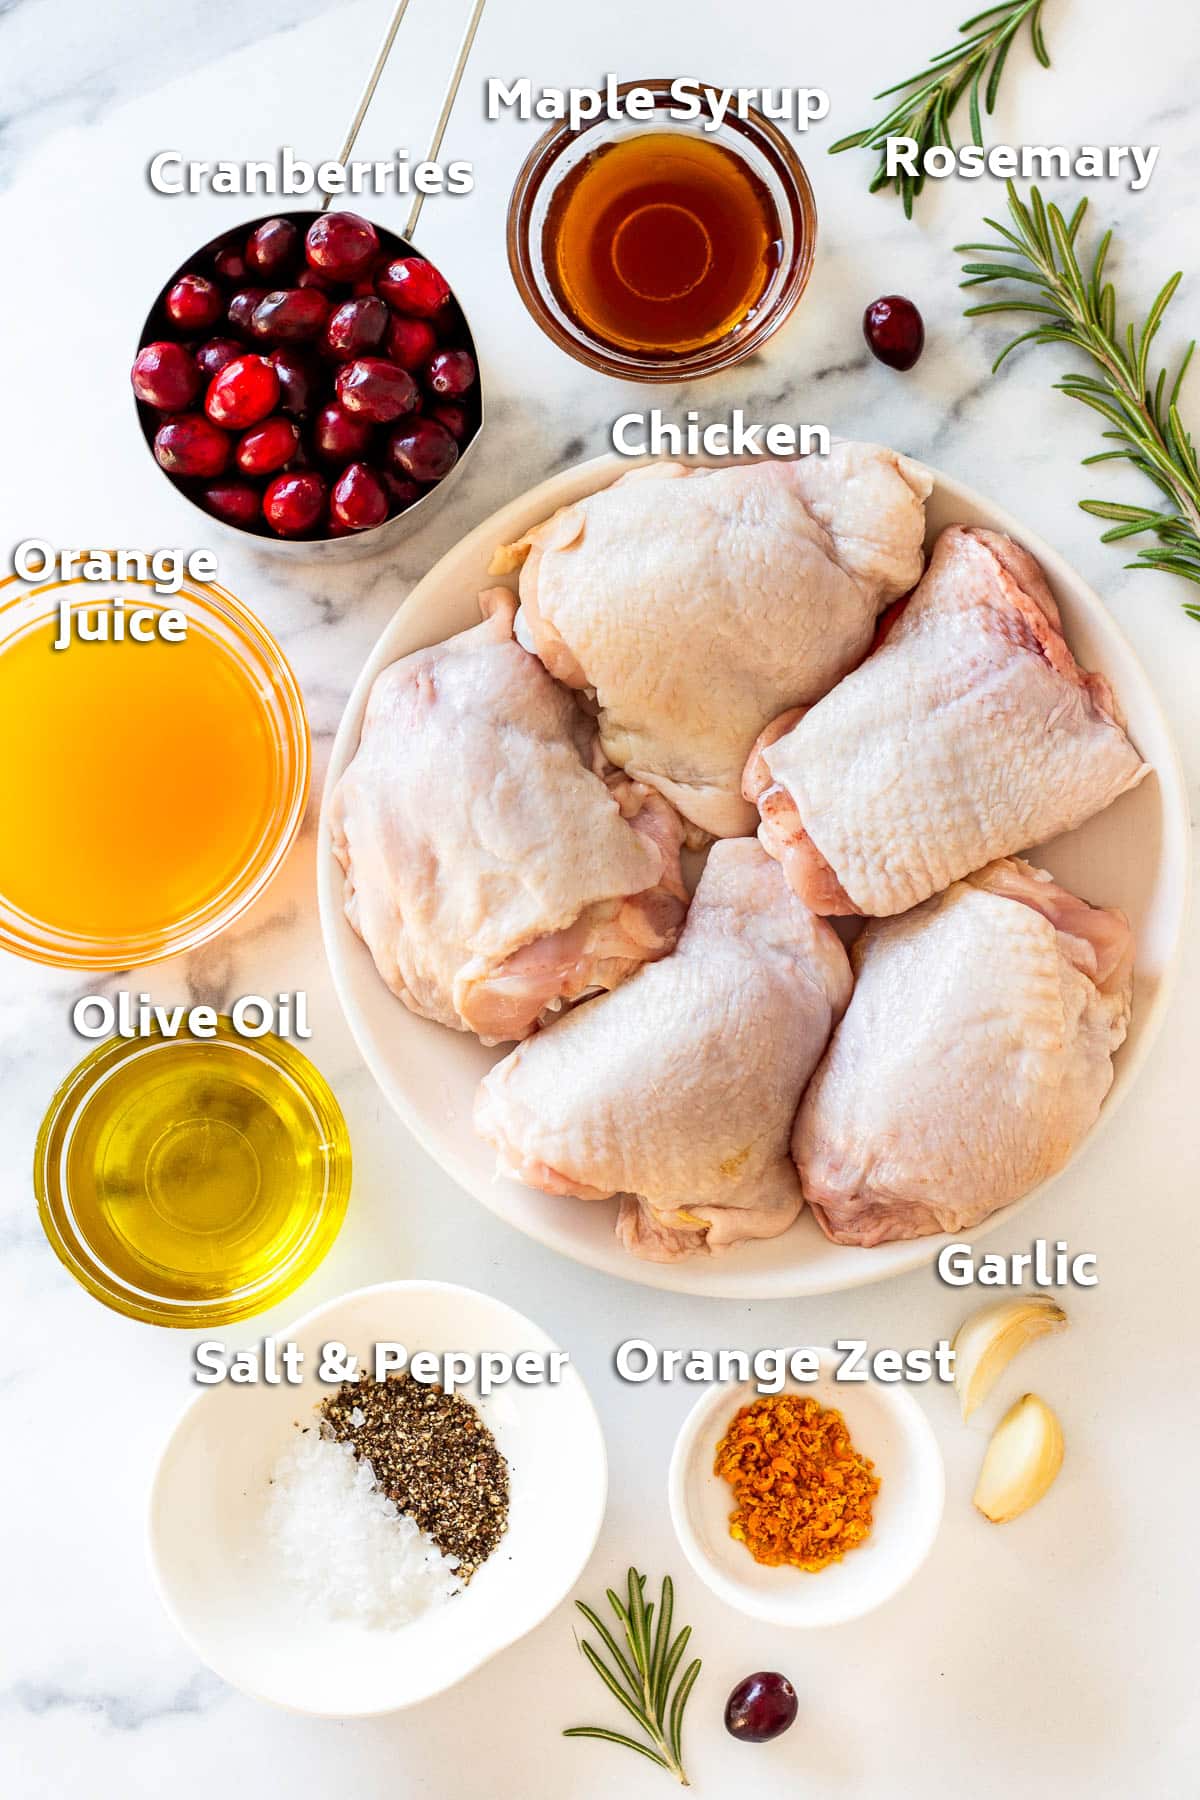 Ingredients including chicken thighs, orange juice, cranberries, maple syrup, garlic and rosemary.